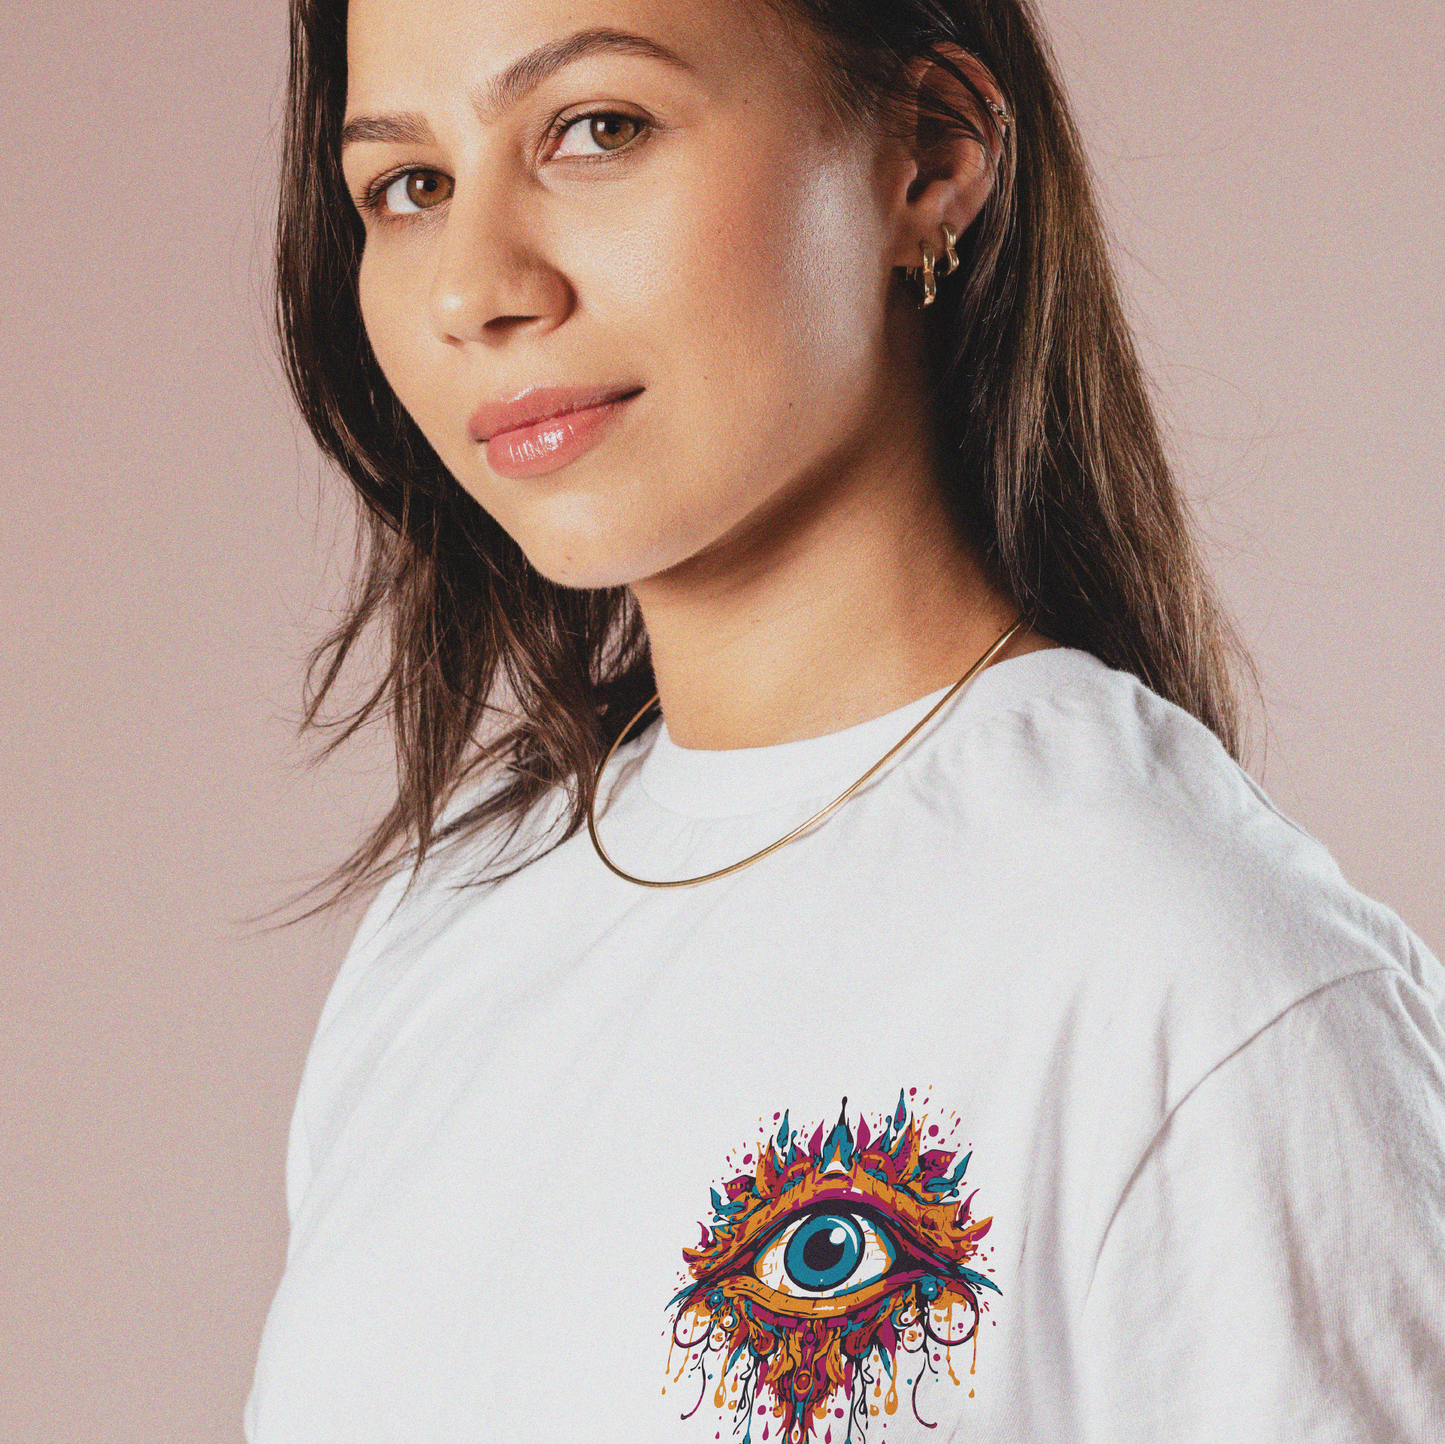 A lady wearing the All Seeing Eye tee. She is looking into the camera, and wearing a gold necklace.